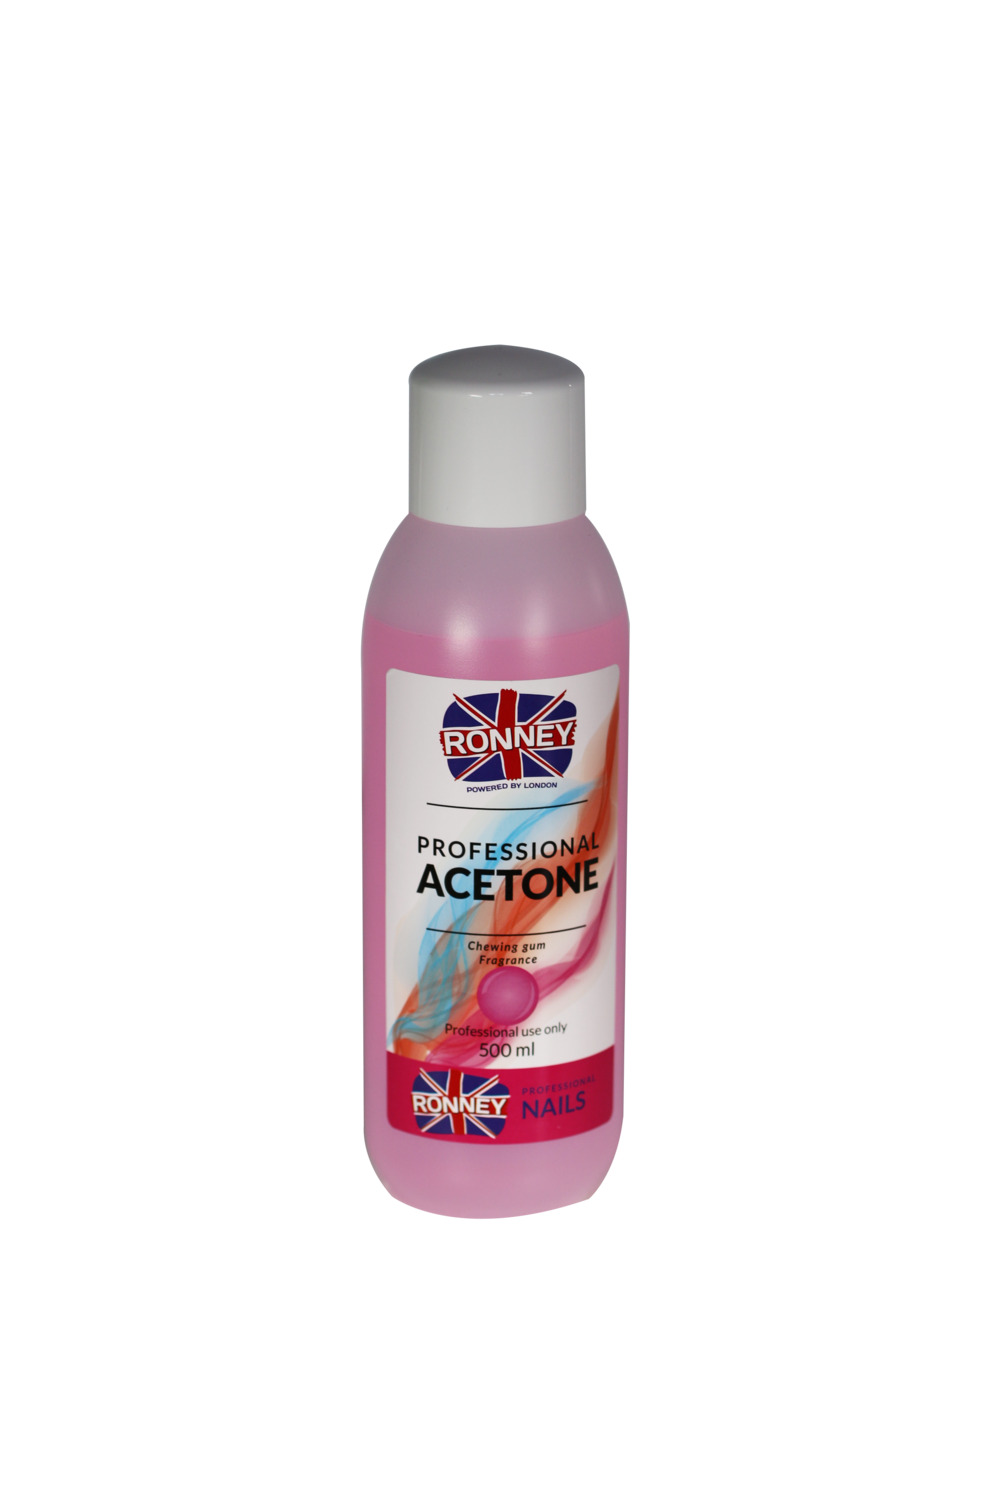 RONNEY Professional Acetone Chewing Gum Fragrance 500 ml